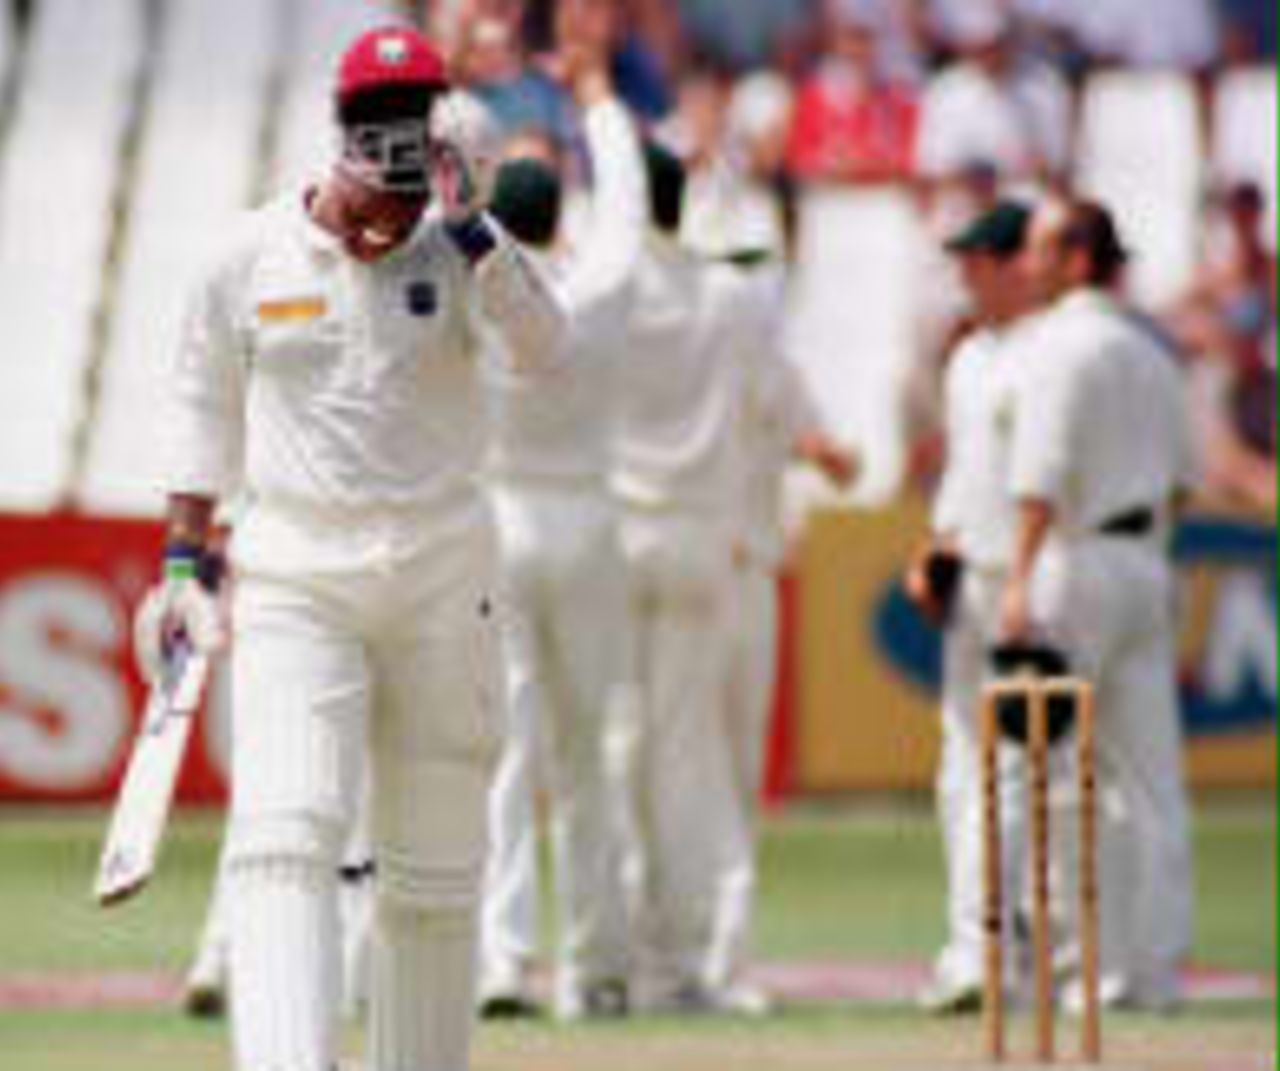 Wallace returns to the pavillion after being dismissed by  Donald West Indies in South Africa, 1998/99, 3rd Test South Africa v West Indies Kingsmead, Durban 28 December 1998